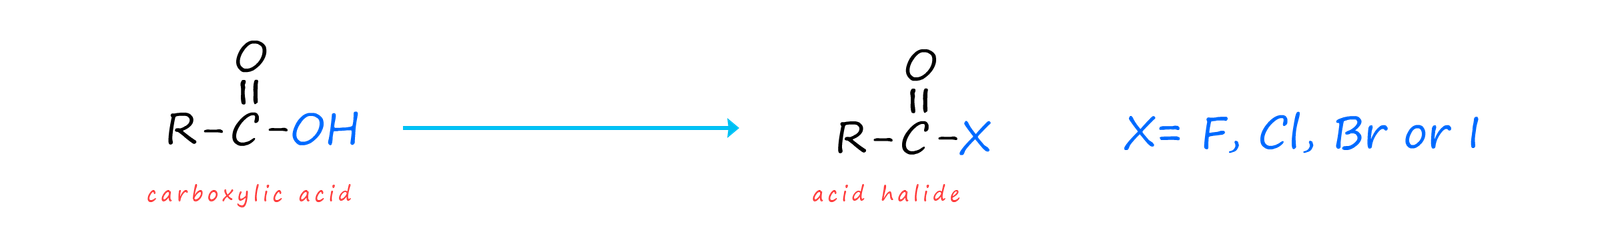 acid halide and carboxylic structures